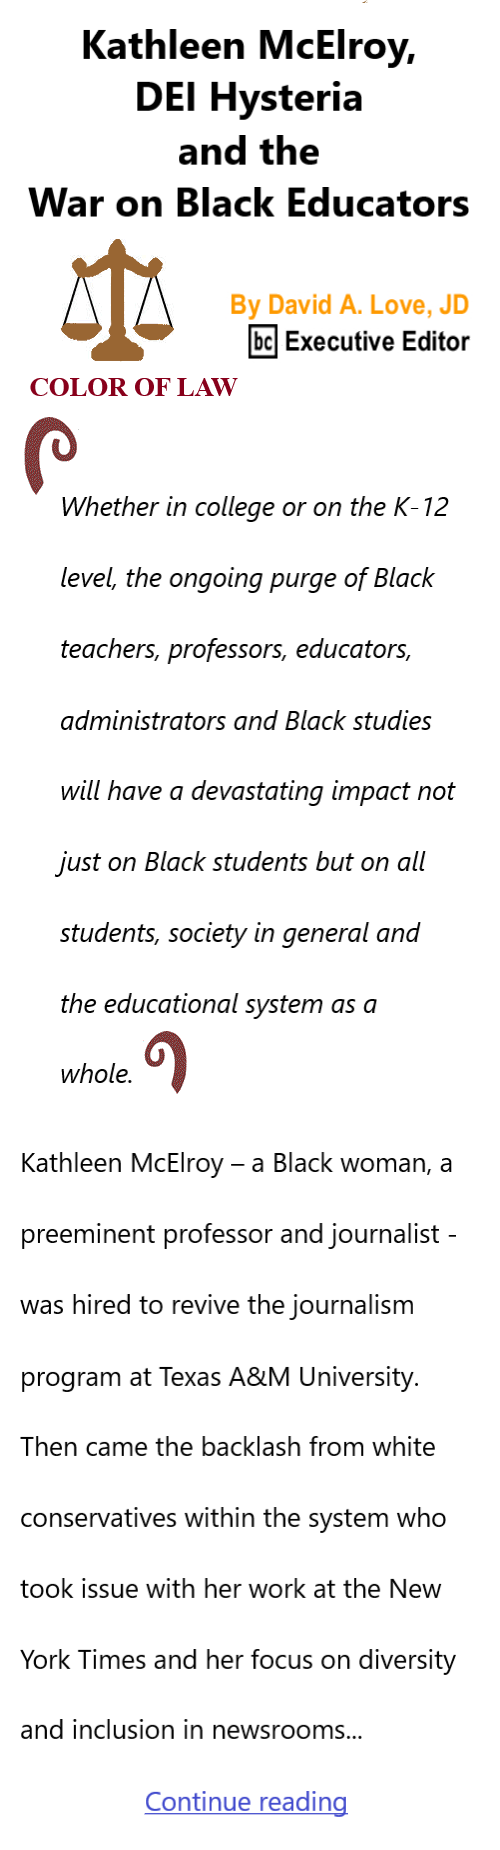 BlackCommentator.com Sept 28, 2023 - Issue 971: Kathleen McElroy, DEI Hysteria and the War on Black Educators - Color of Law By David A. Love, JD, BC Executive Editor